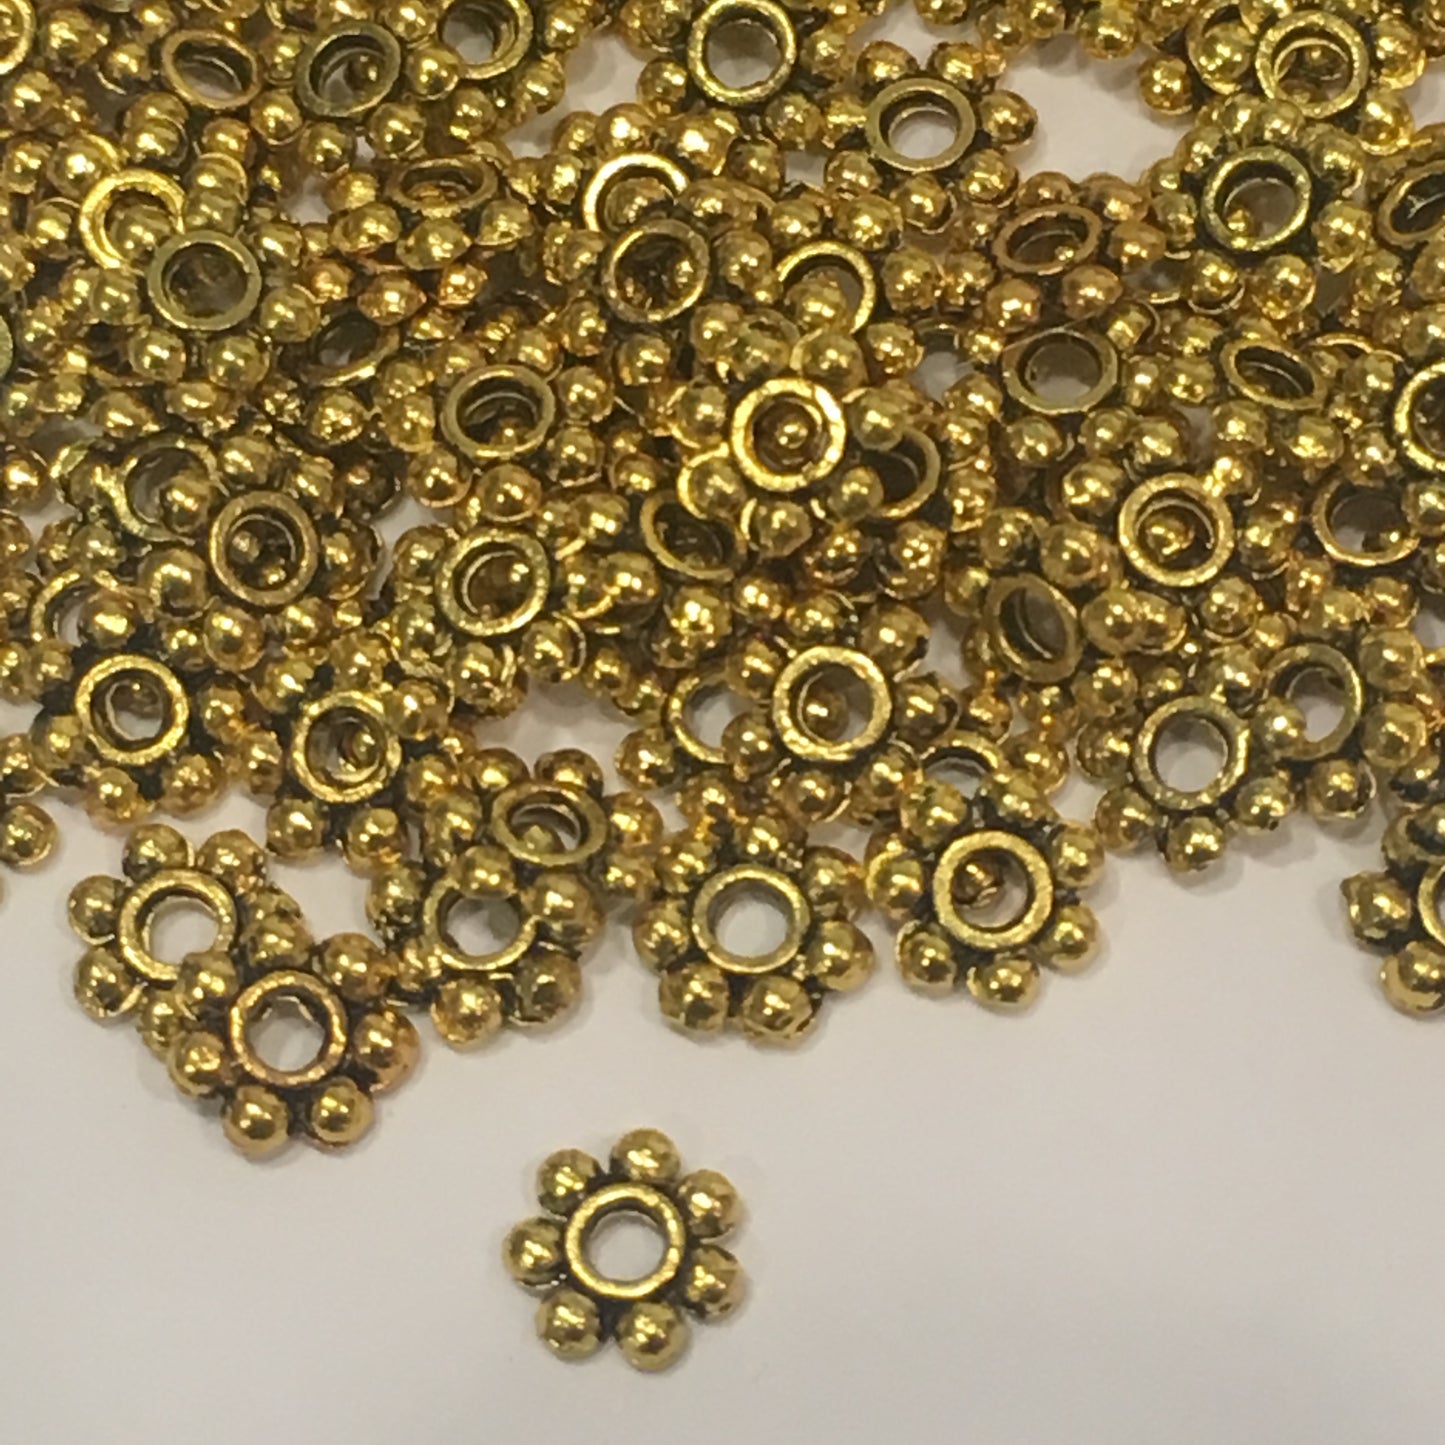 Antique Gold Daisy Spacers, 4 x 1 mm - 100 Spacers